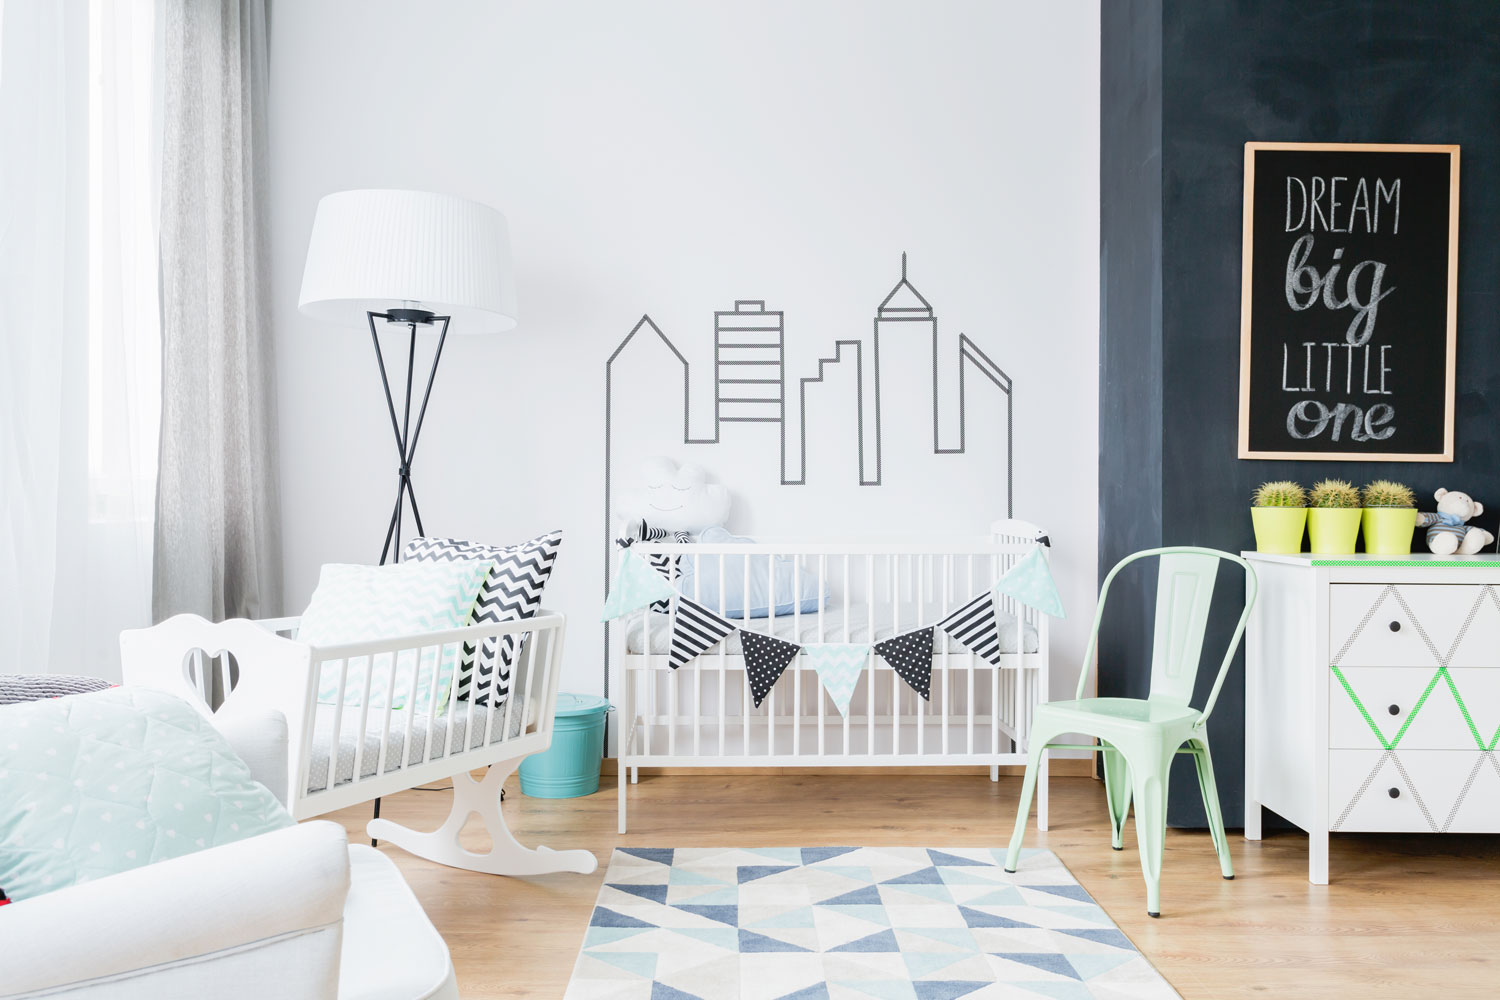 A city scape decorated wall with a white babies crib and small rocking chair